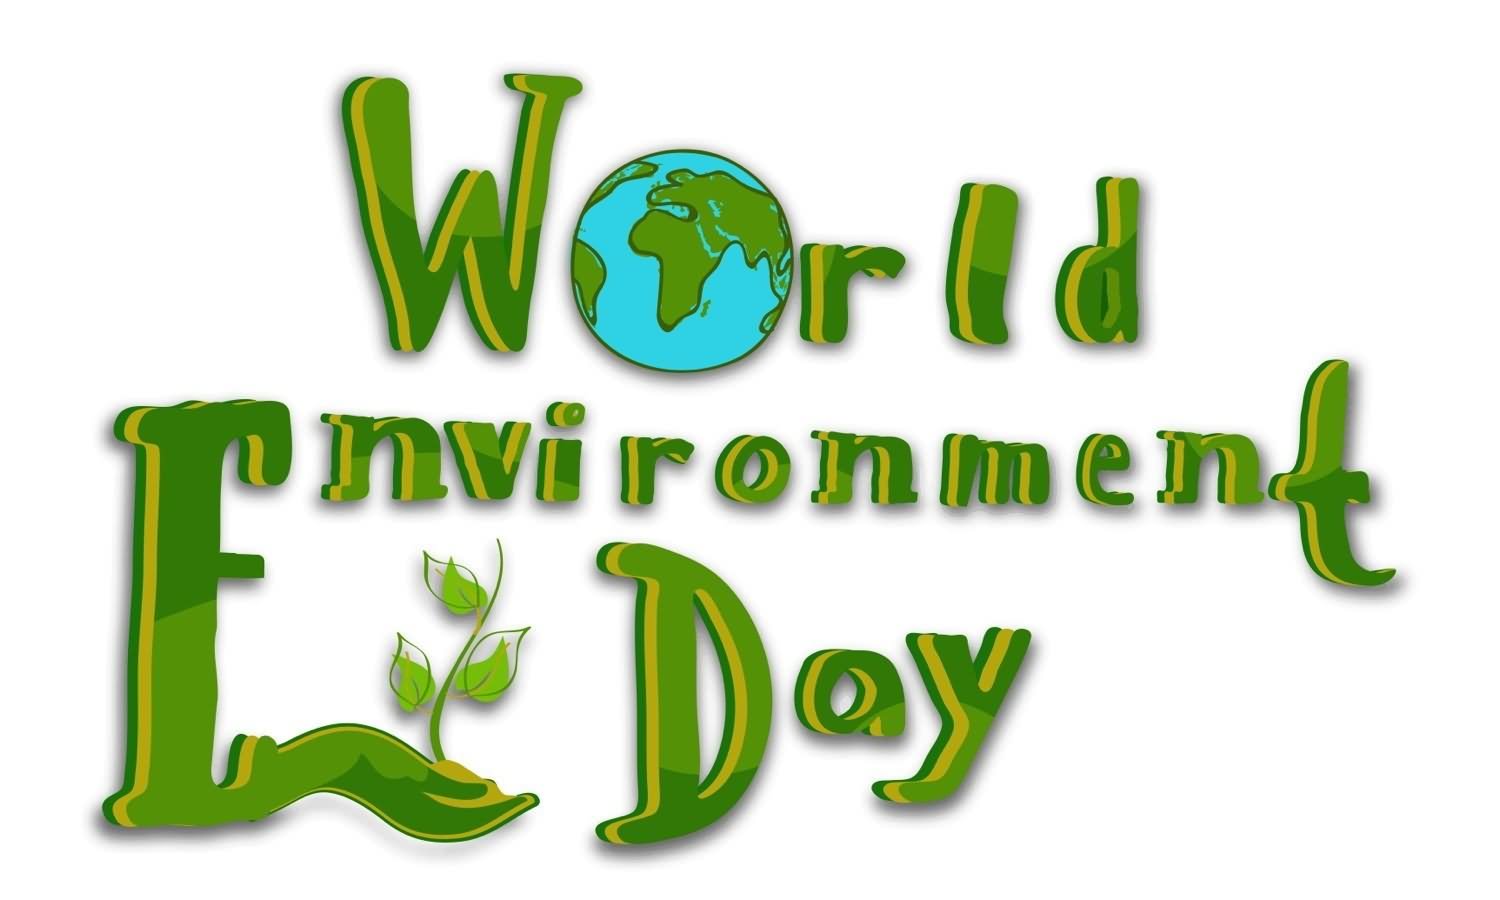 World Environment Day Beautiful Clipart Image